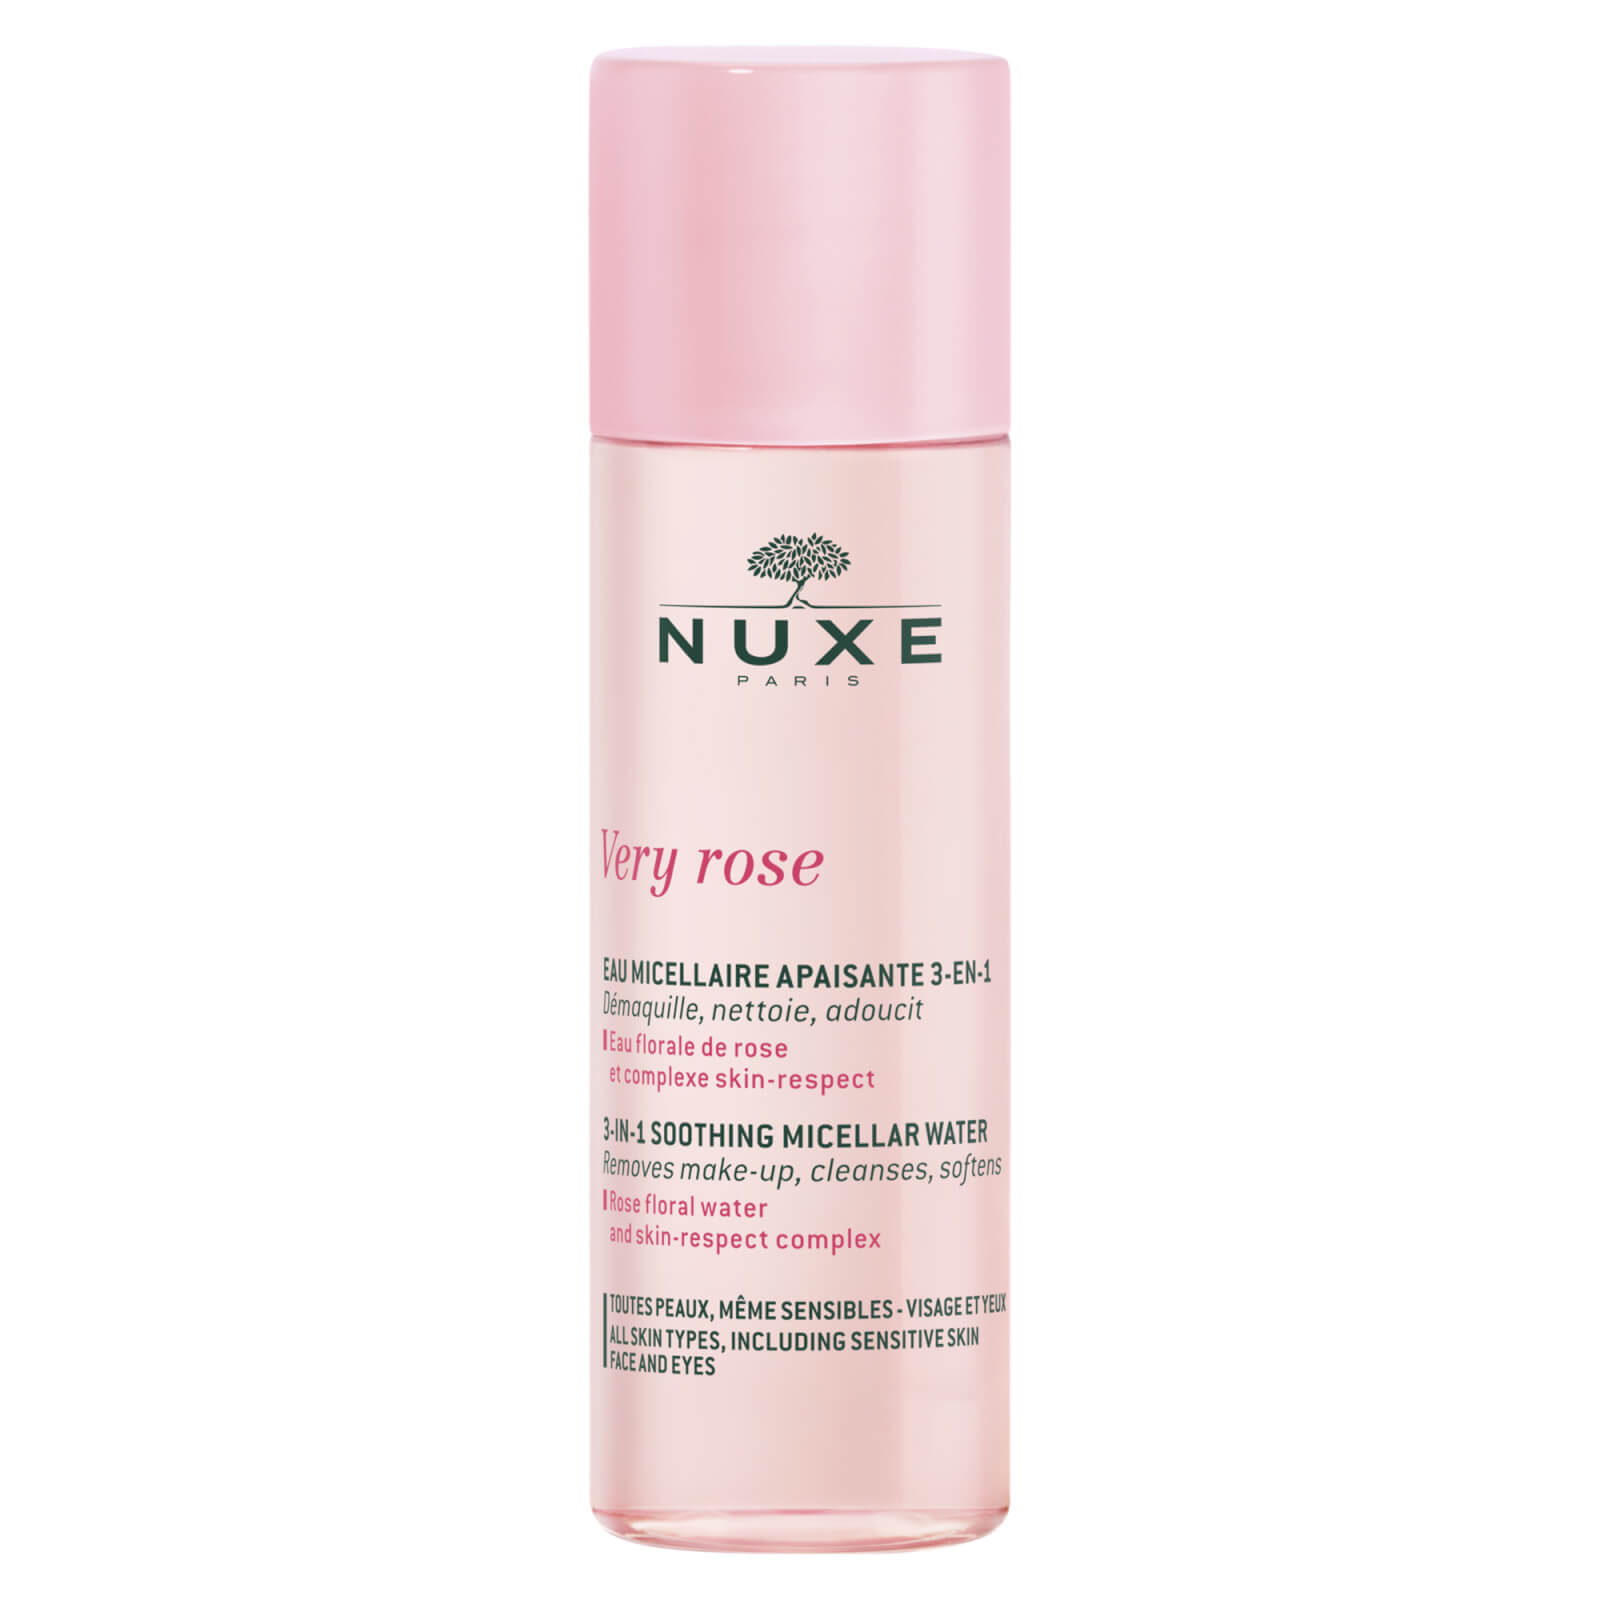 Nuxe 3-in-1 Soothing Micellar Water, Very Rose 50ml In White